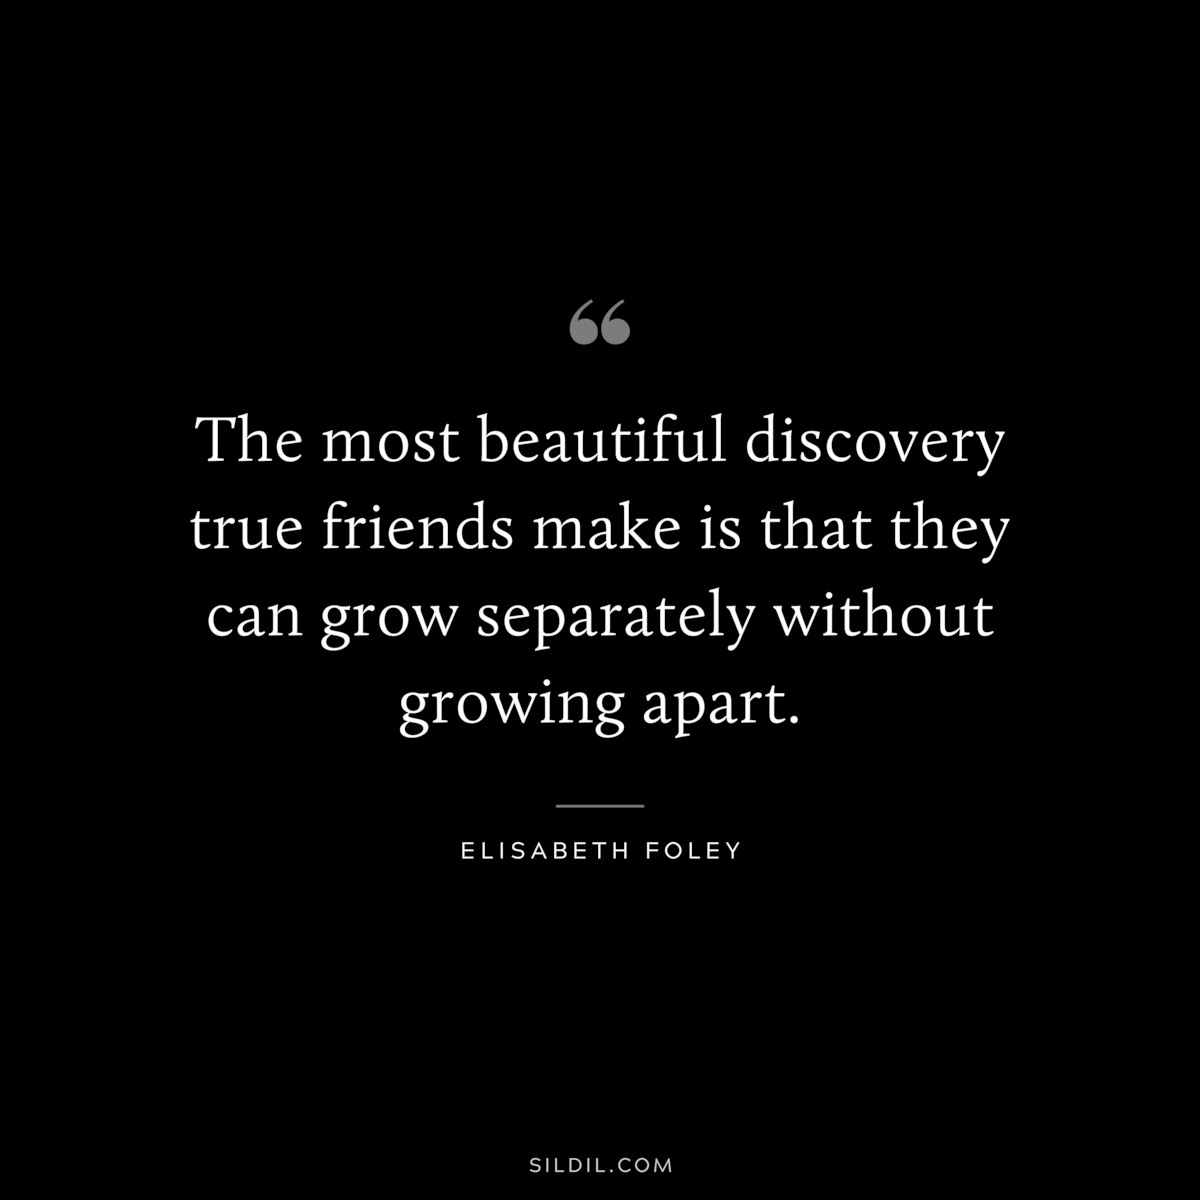 The most beautiful discovery true friends make is that they can grow separately without growing apart. ― Elisabeth Foley